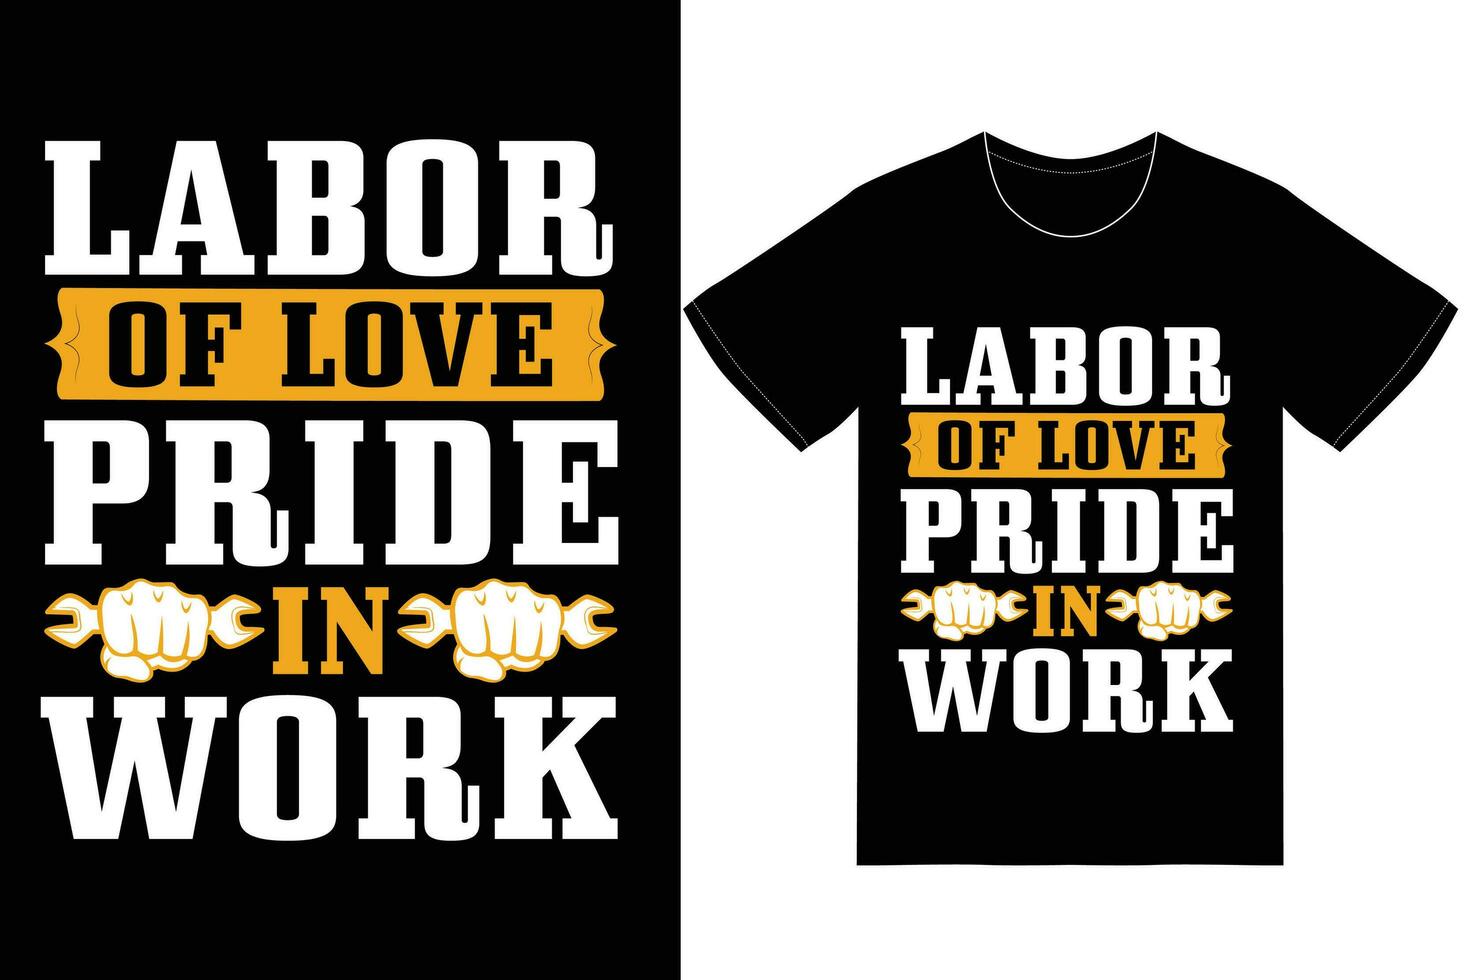 Labor Day T-shirt Design. Labor Day Vector. vector